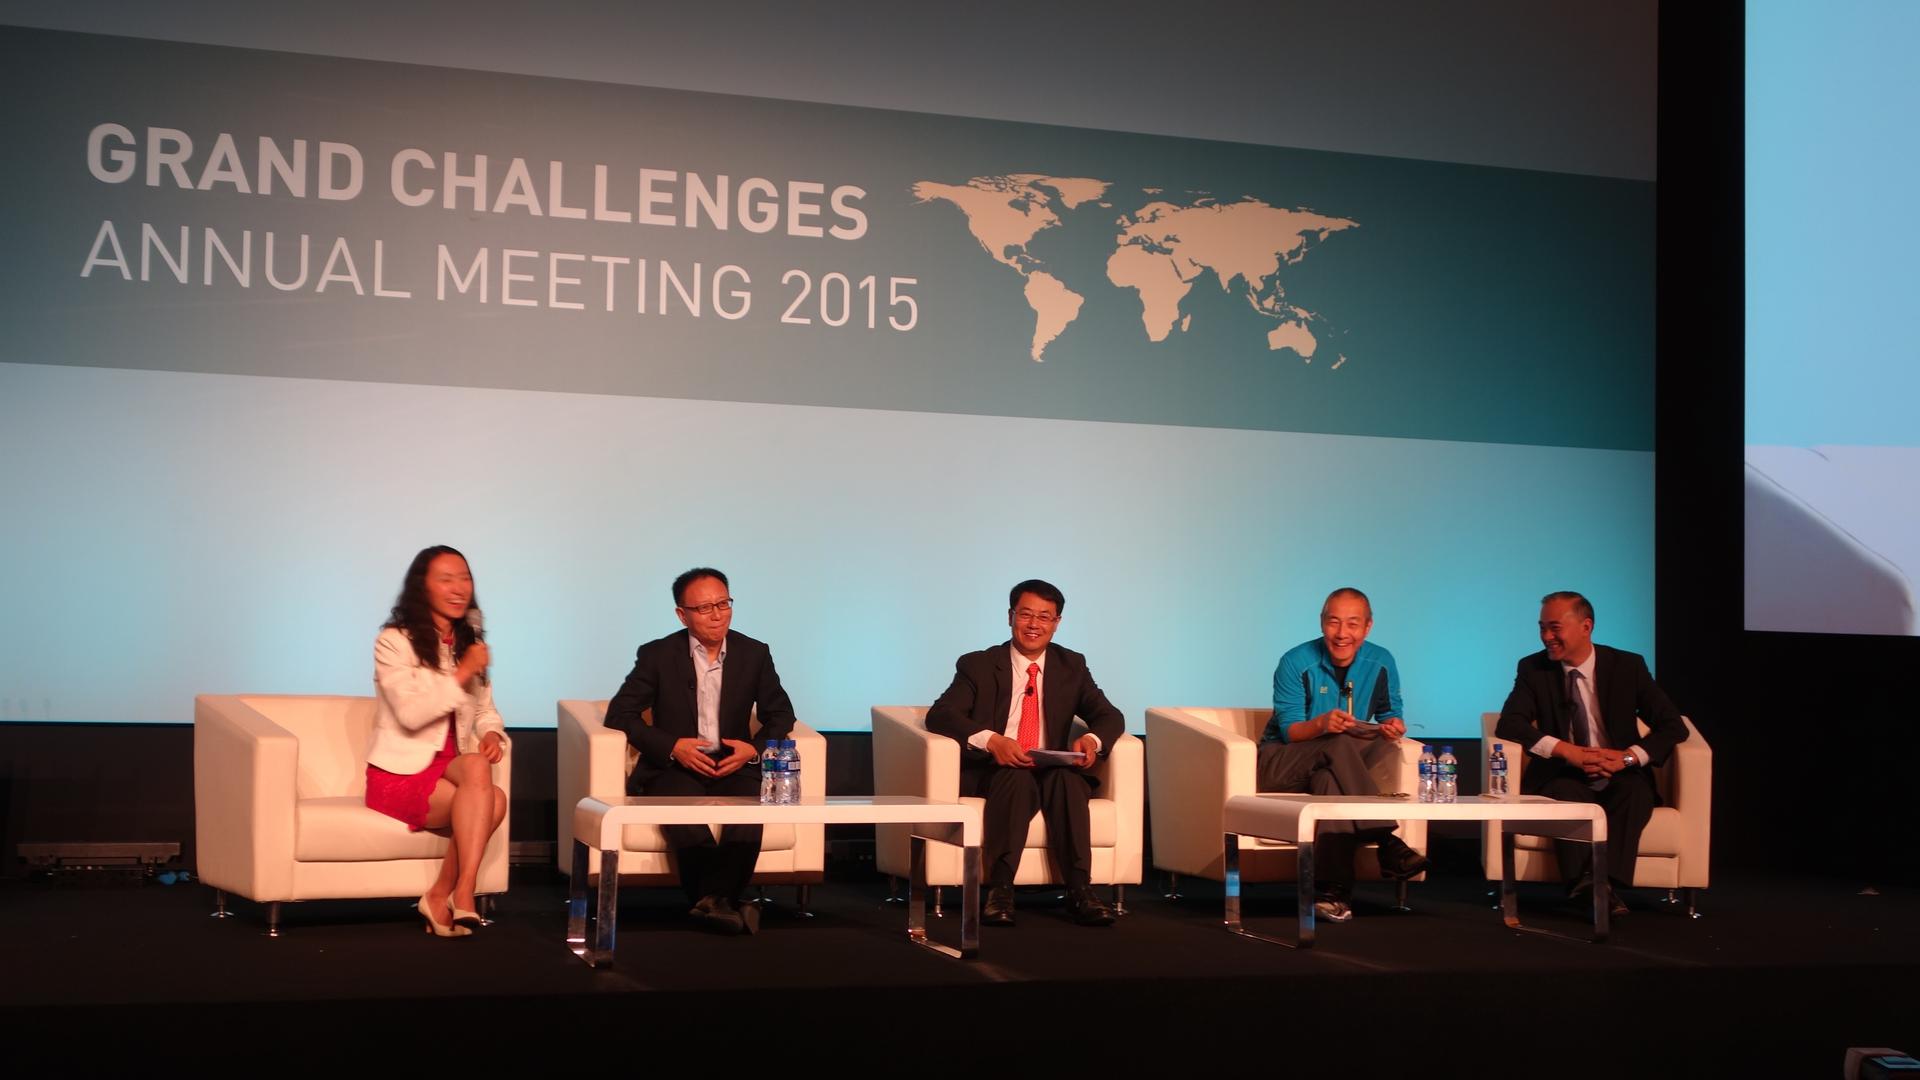 BGI founder Wang Jian, in athletic jacket, joins other panelists at Grand Challenges talk in Beijing